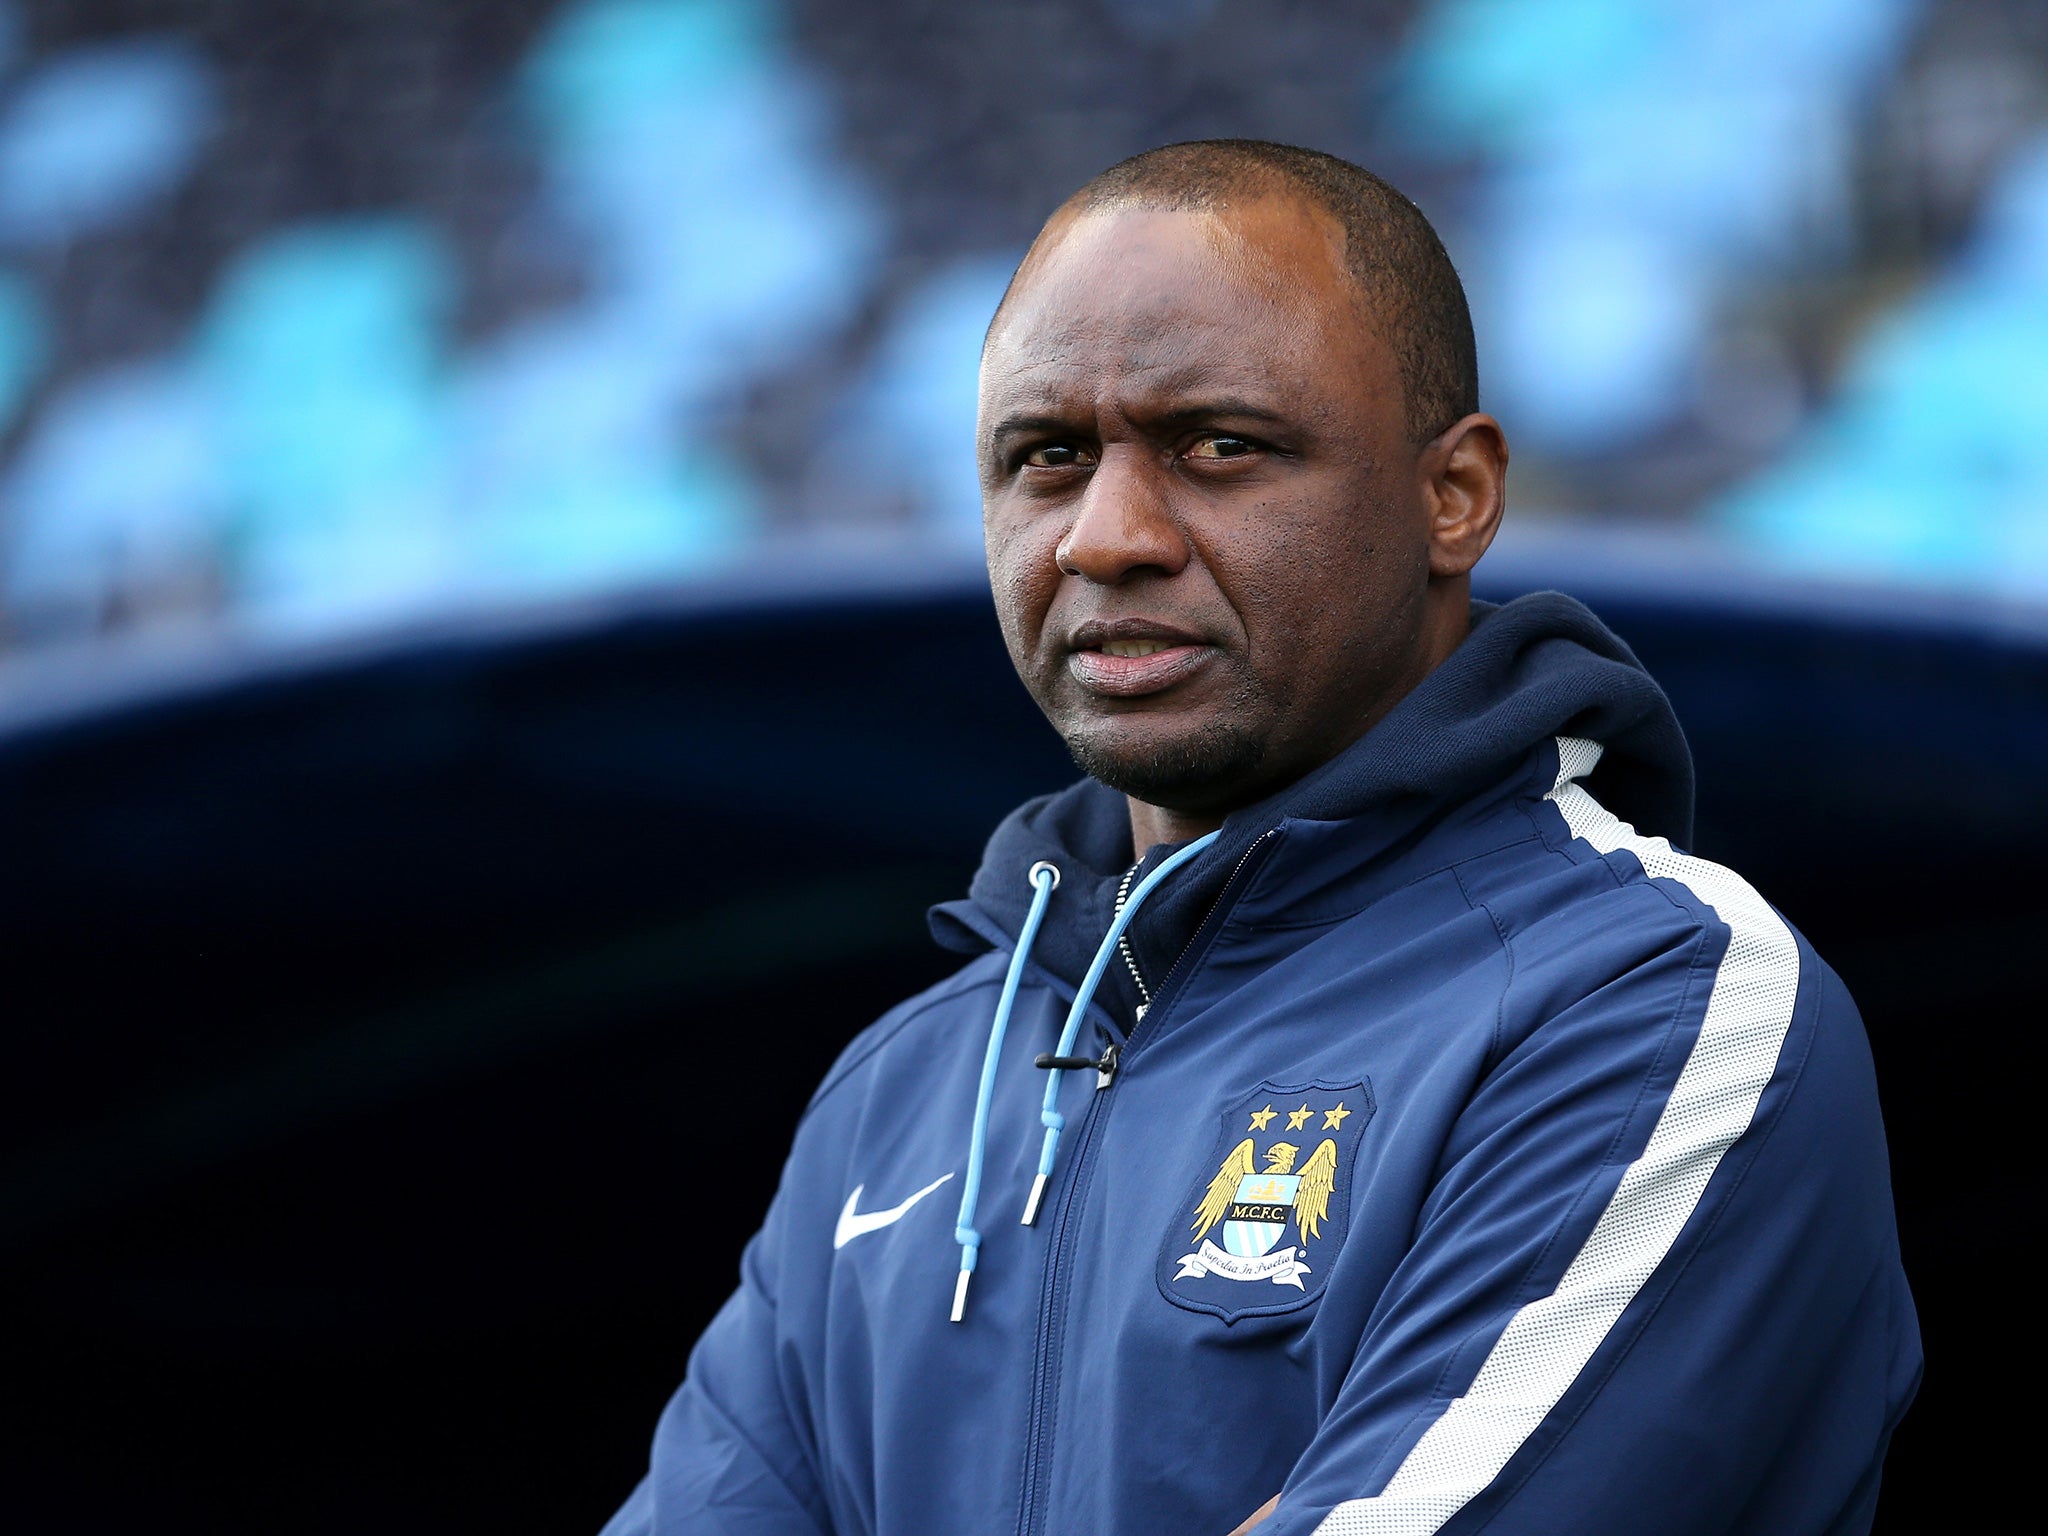 Taking the helm at Newcastle would represent Vieira's first full managerial role